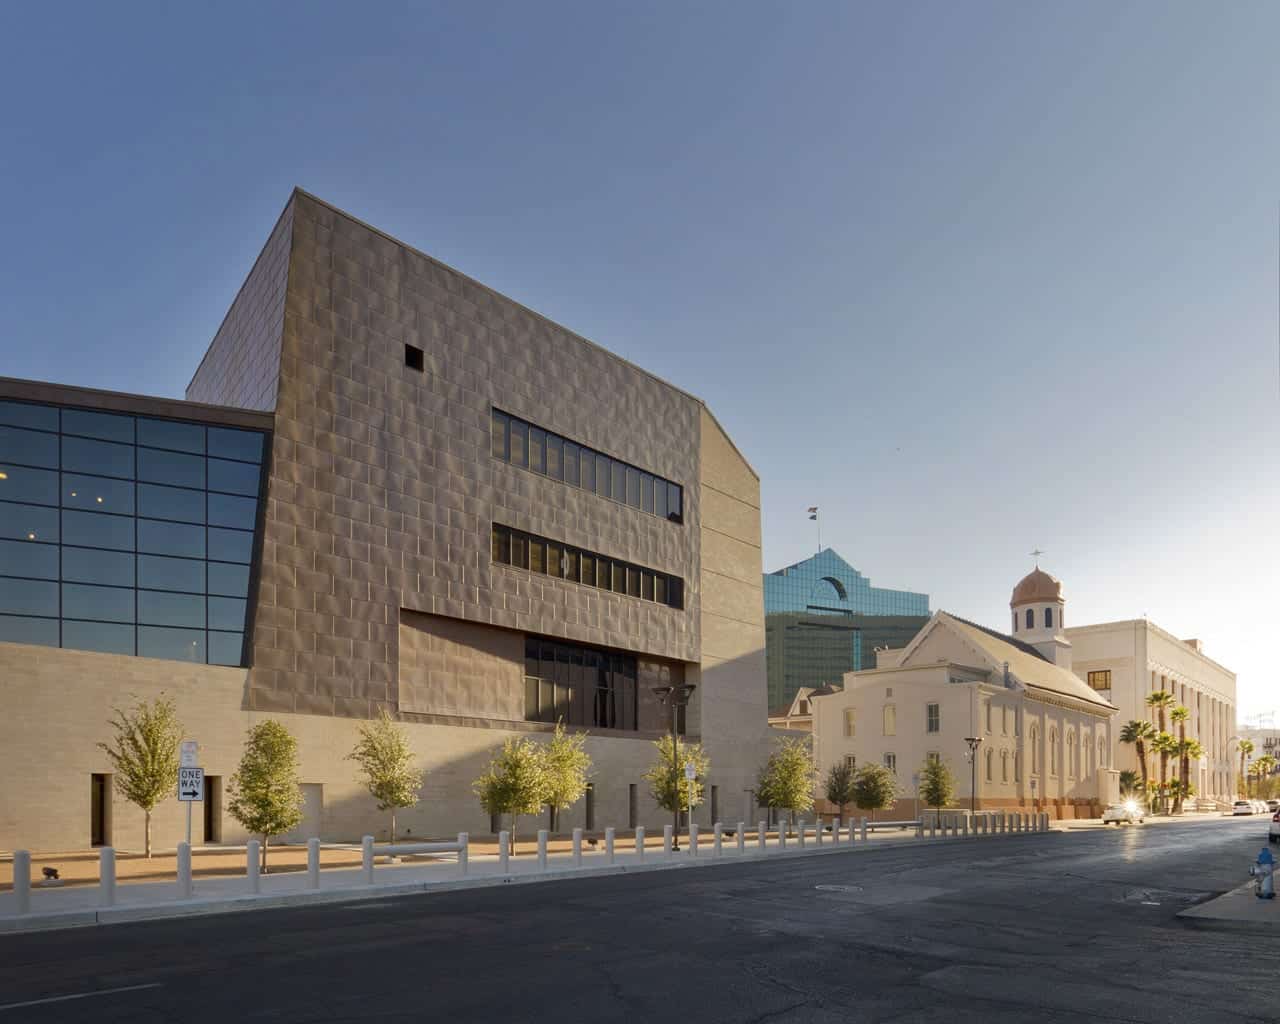 North elevation of the El Paso Federal Courthouse.